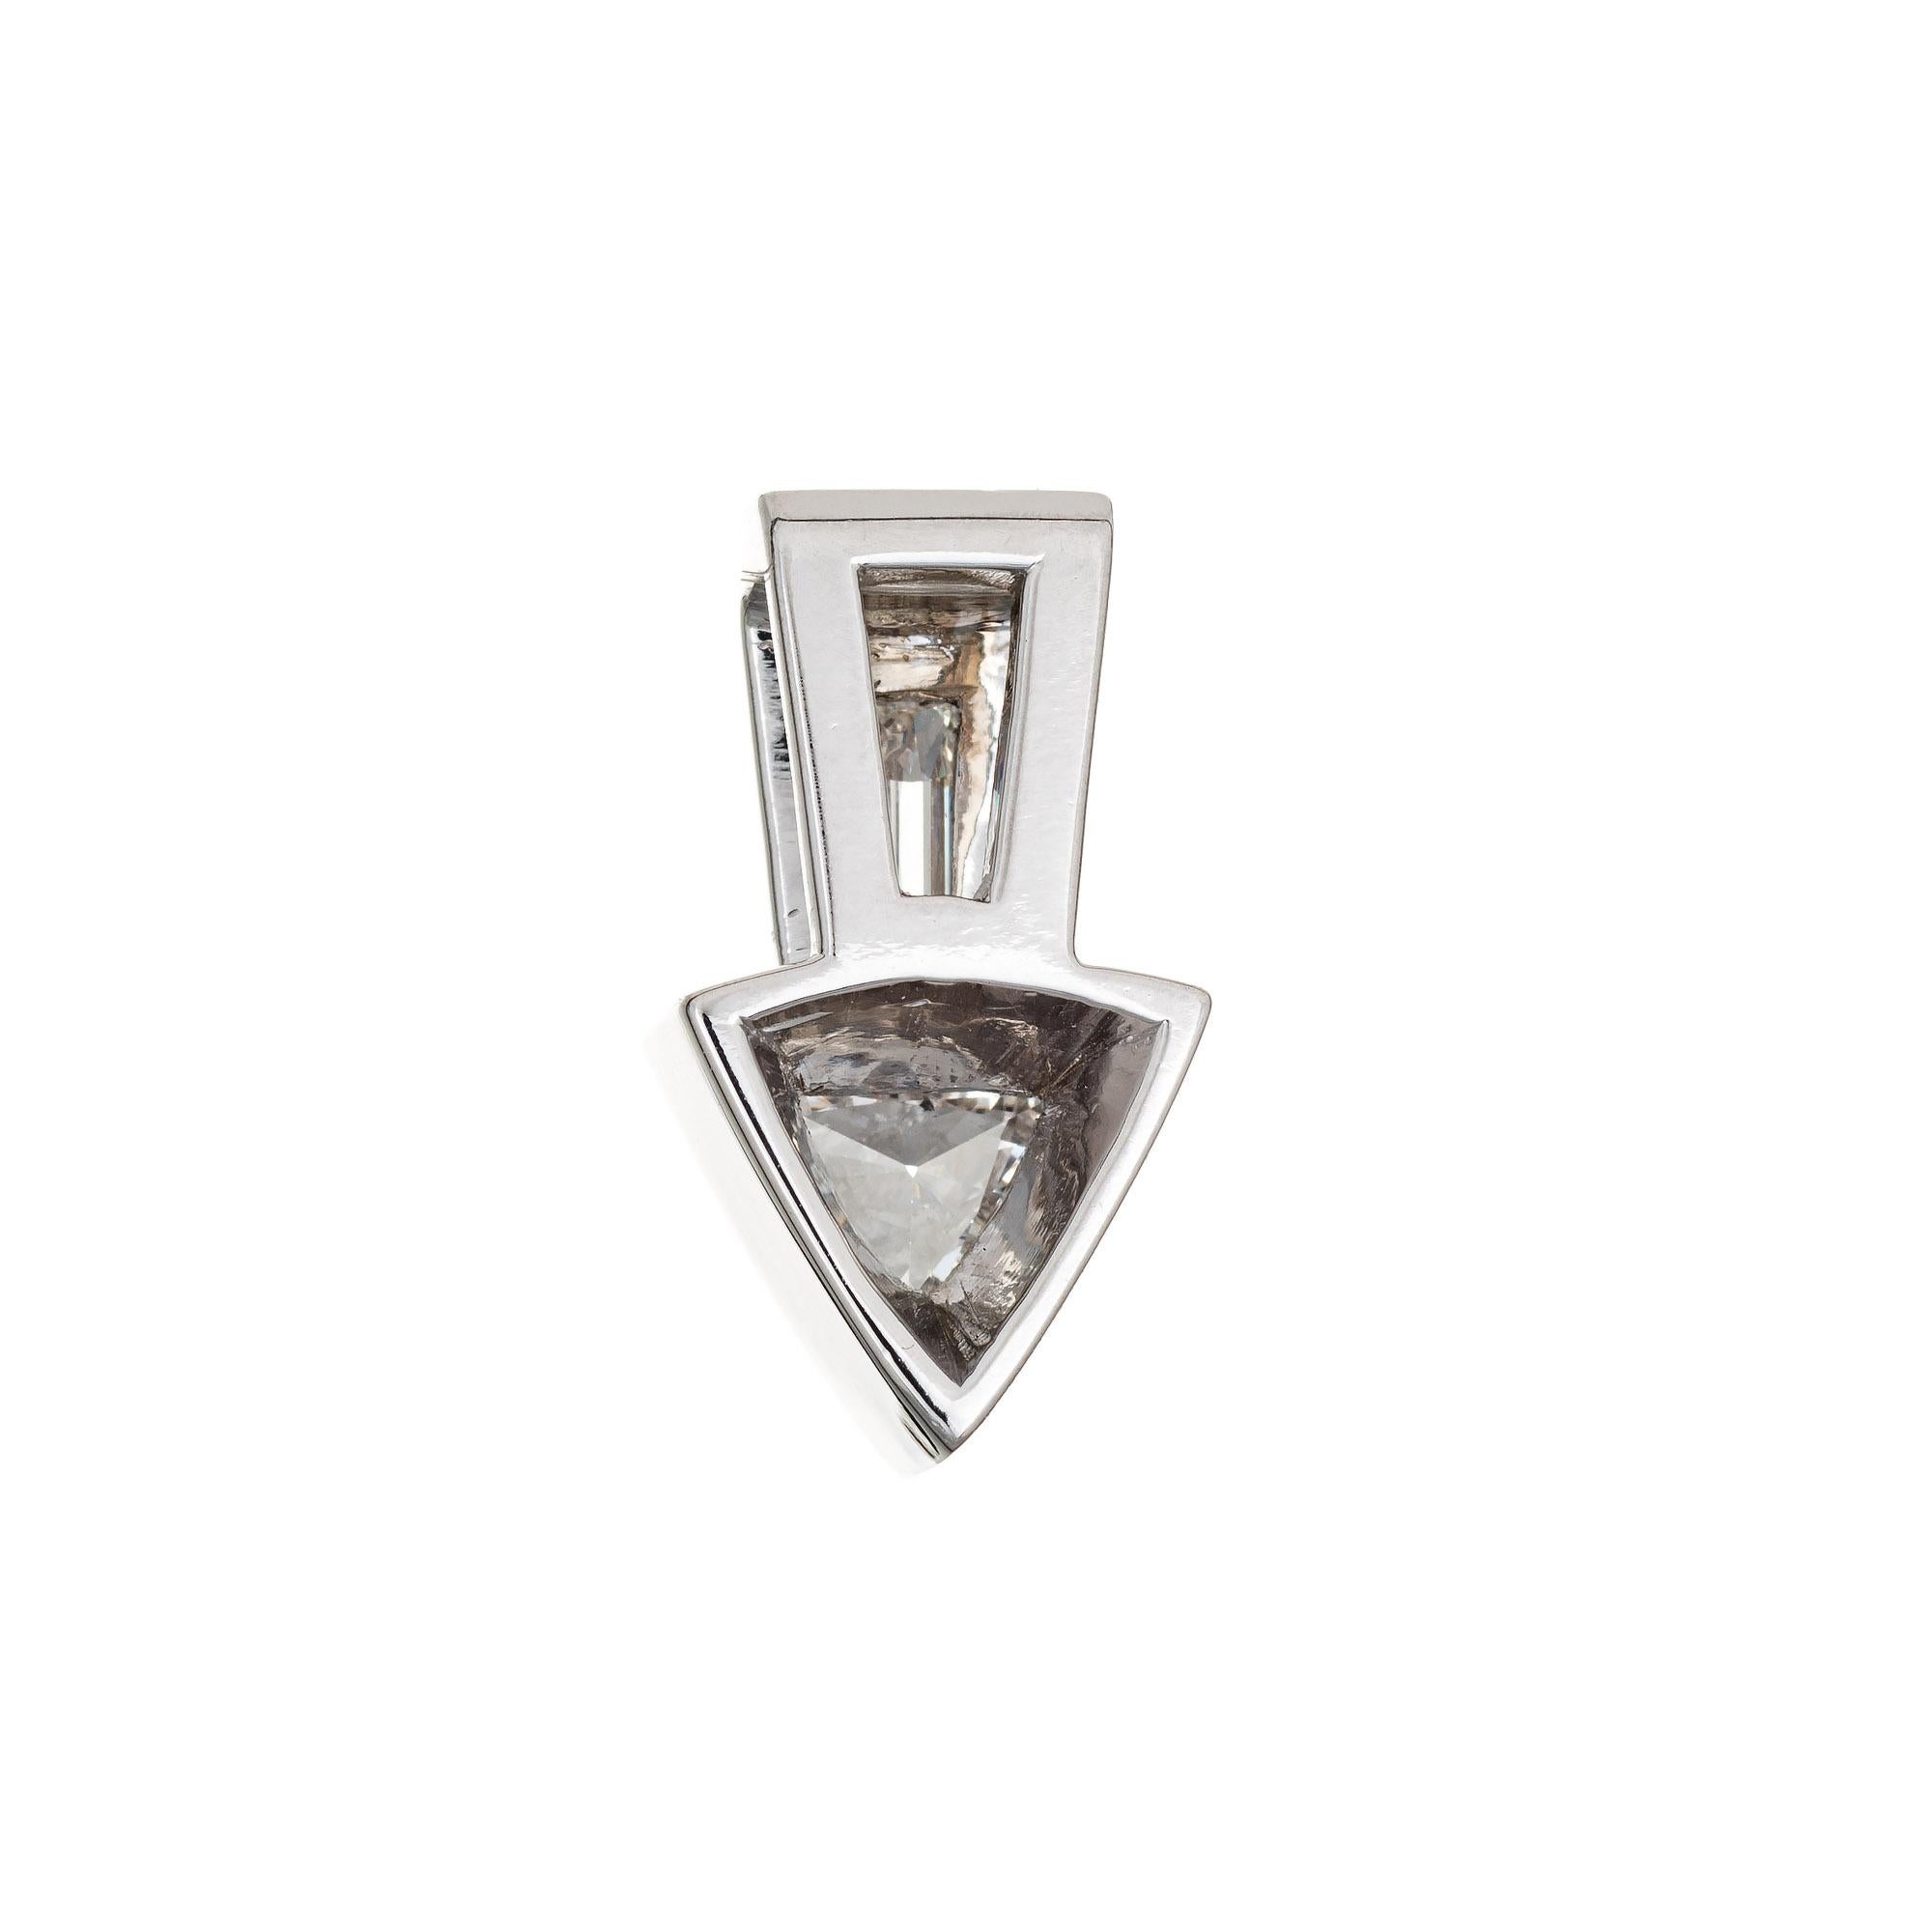 Finely detailed diamond arrow pendant crafted in 14 karat white gold. 

Two diamonds (trillion cut and straight baguette cut) are estimated at 0.33 carats and 0.24 carats. The total diamond weight is estimated at 0.57 carats (estimated at H-I color